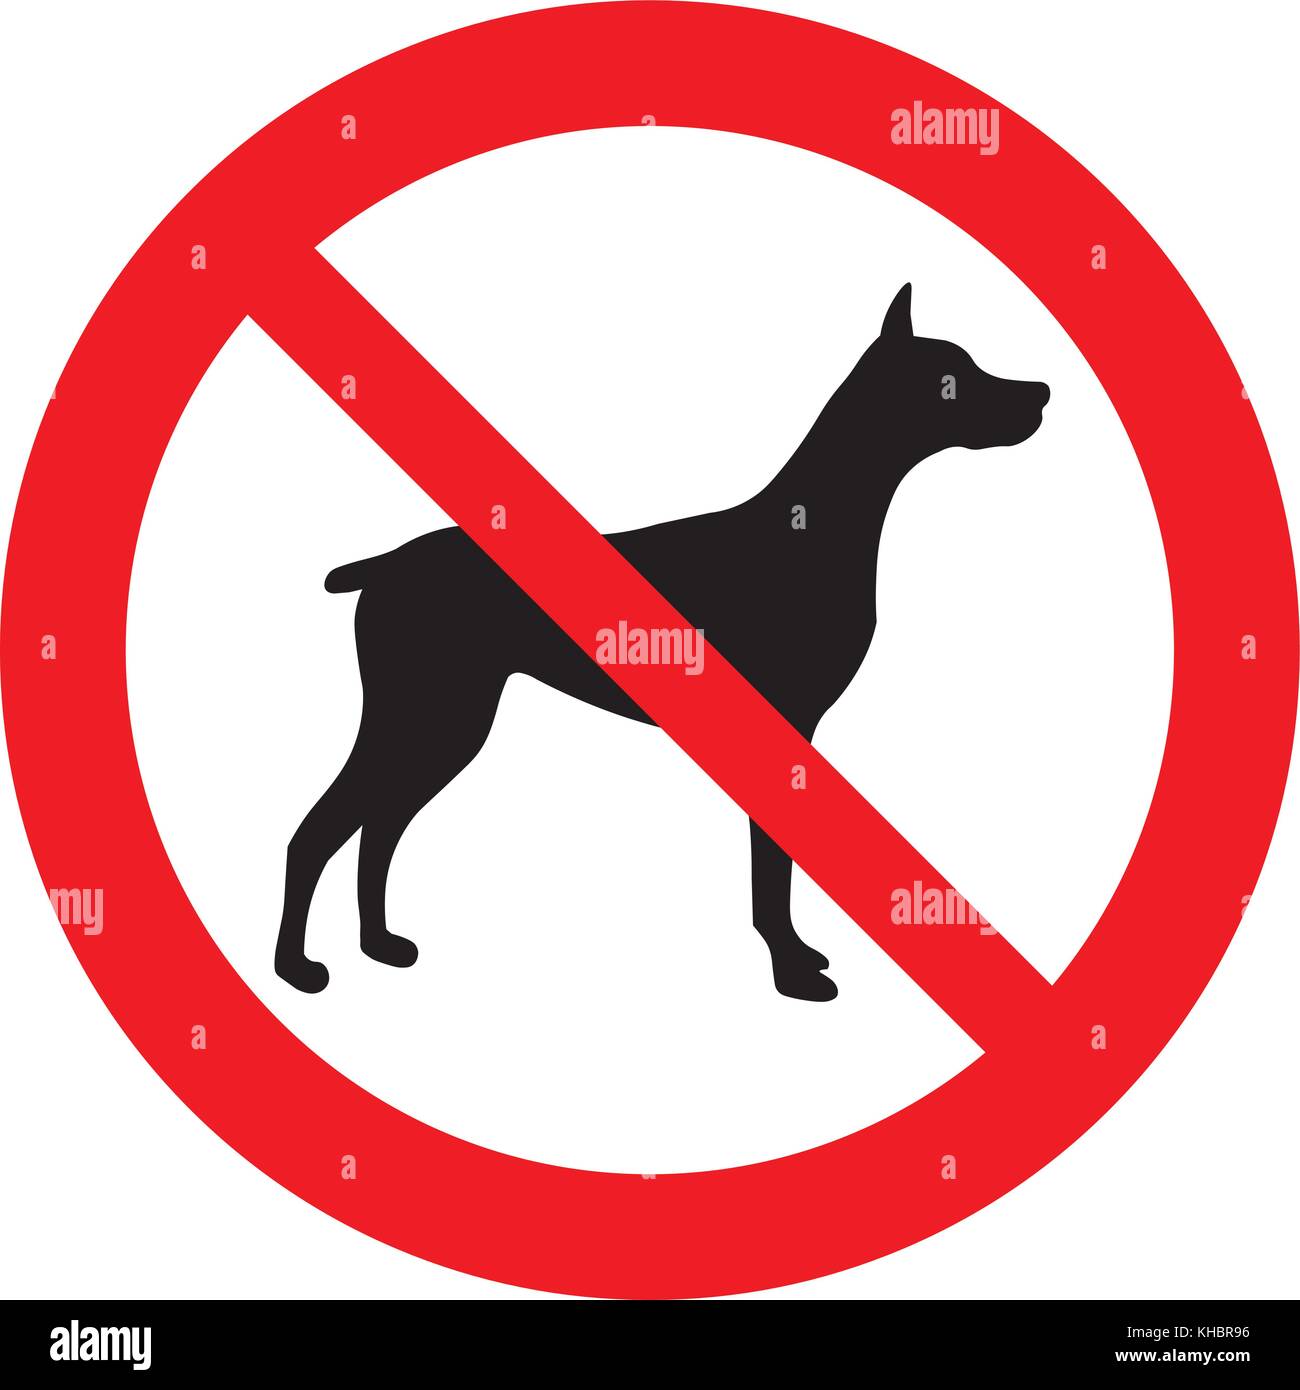 No dogs allowed. Dog prohibition sign, vector illustration Stock Vector